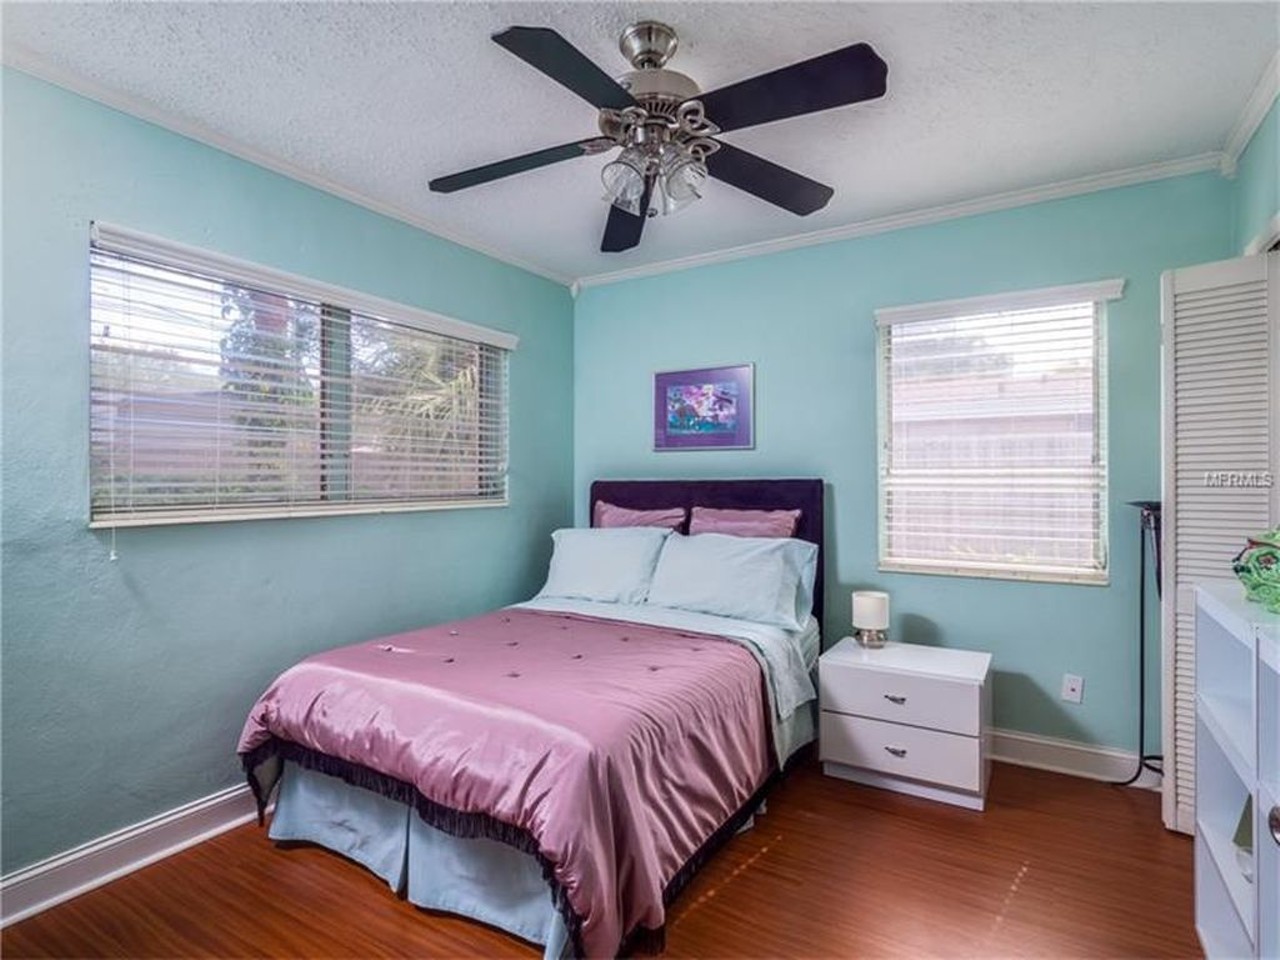 3701 Virginia Drive
3 beds, 2 baths, 2,044 square feet, $289,999
The home's bright, airy feel continues to the bedroom.